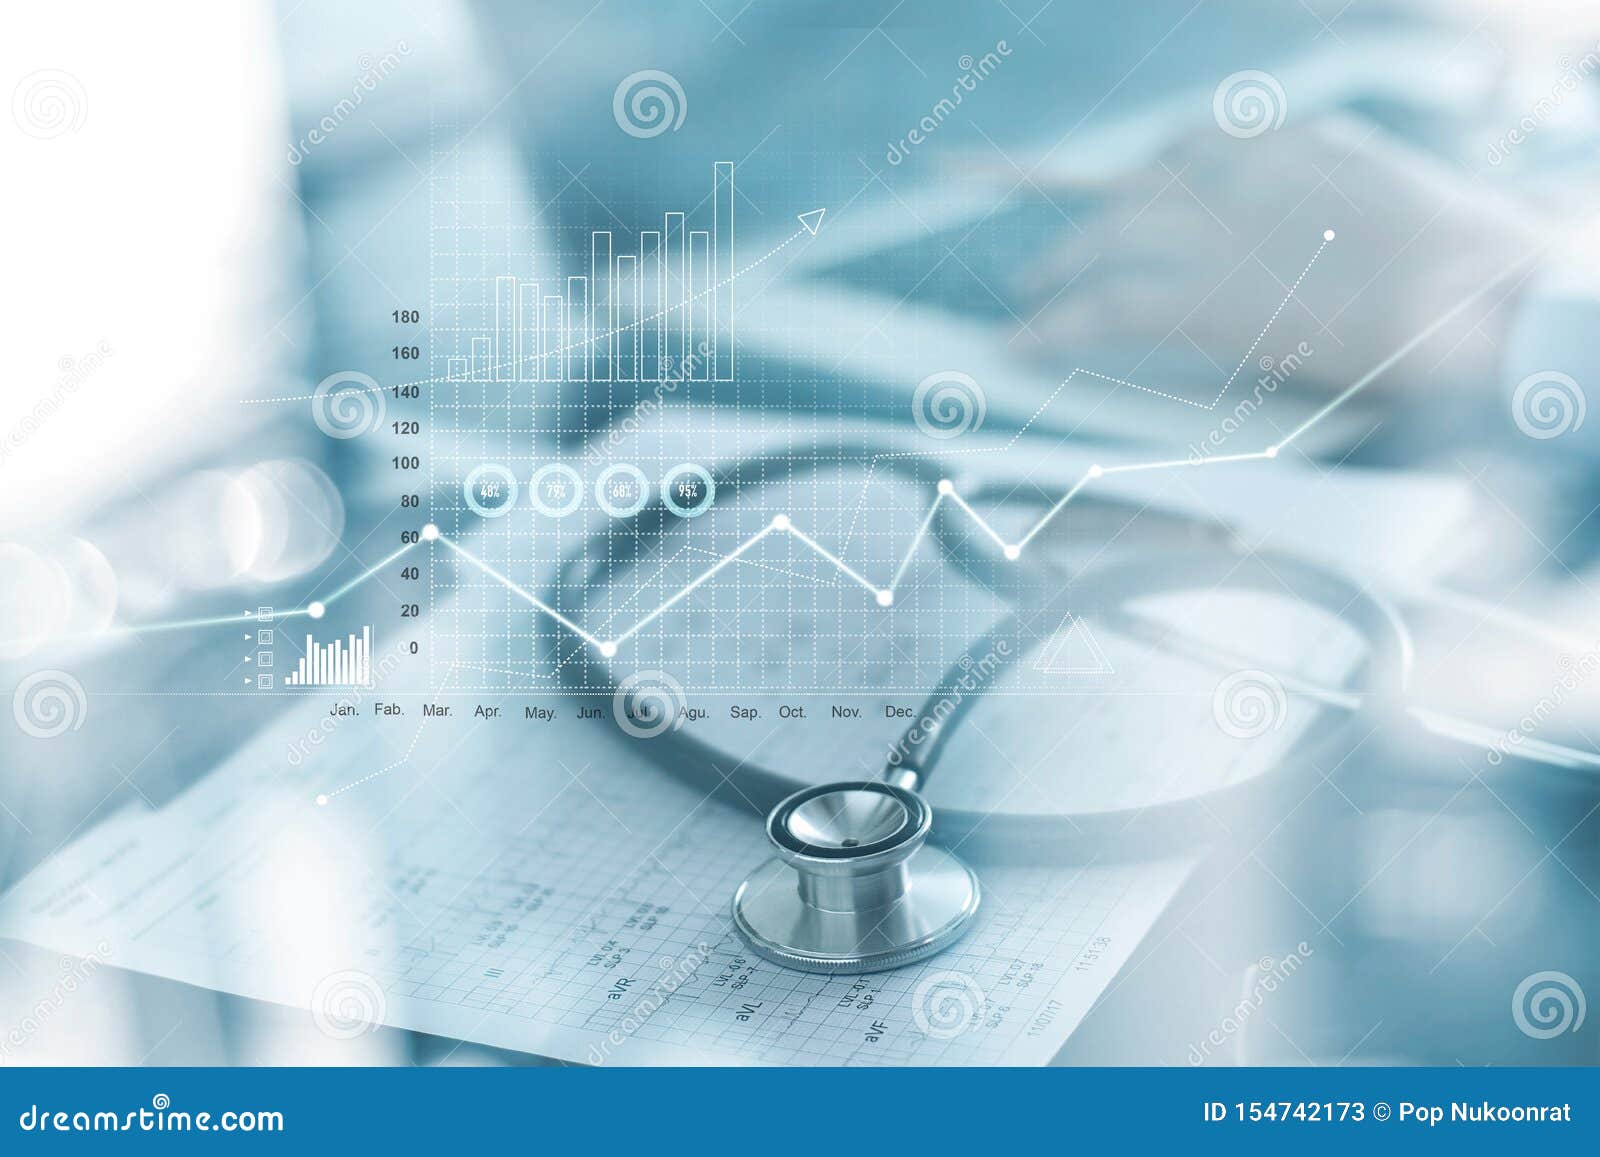 healthcare business graph and medical examination and businessman analyzing data and growth chart on blured background